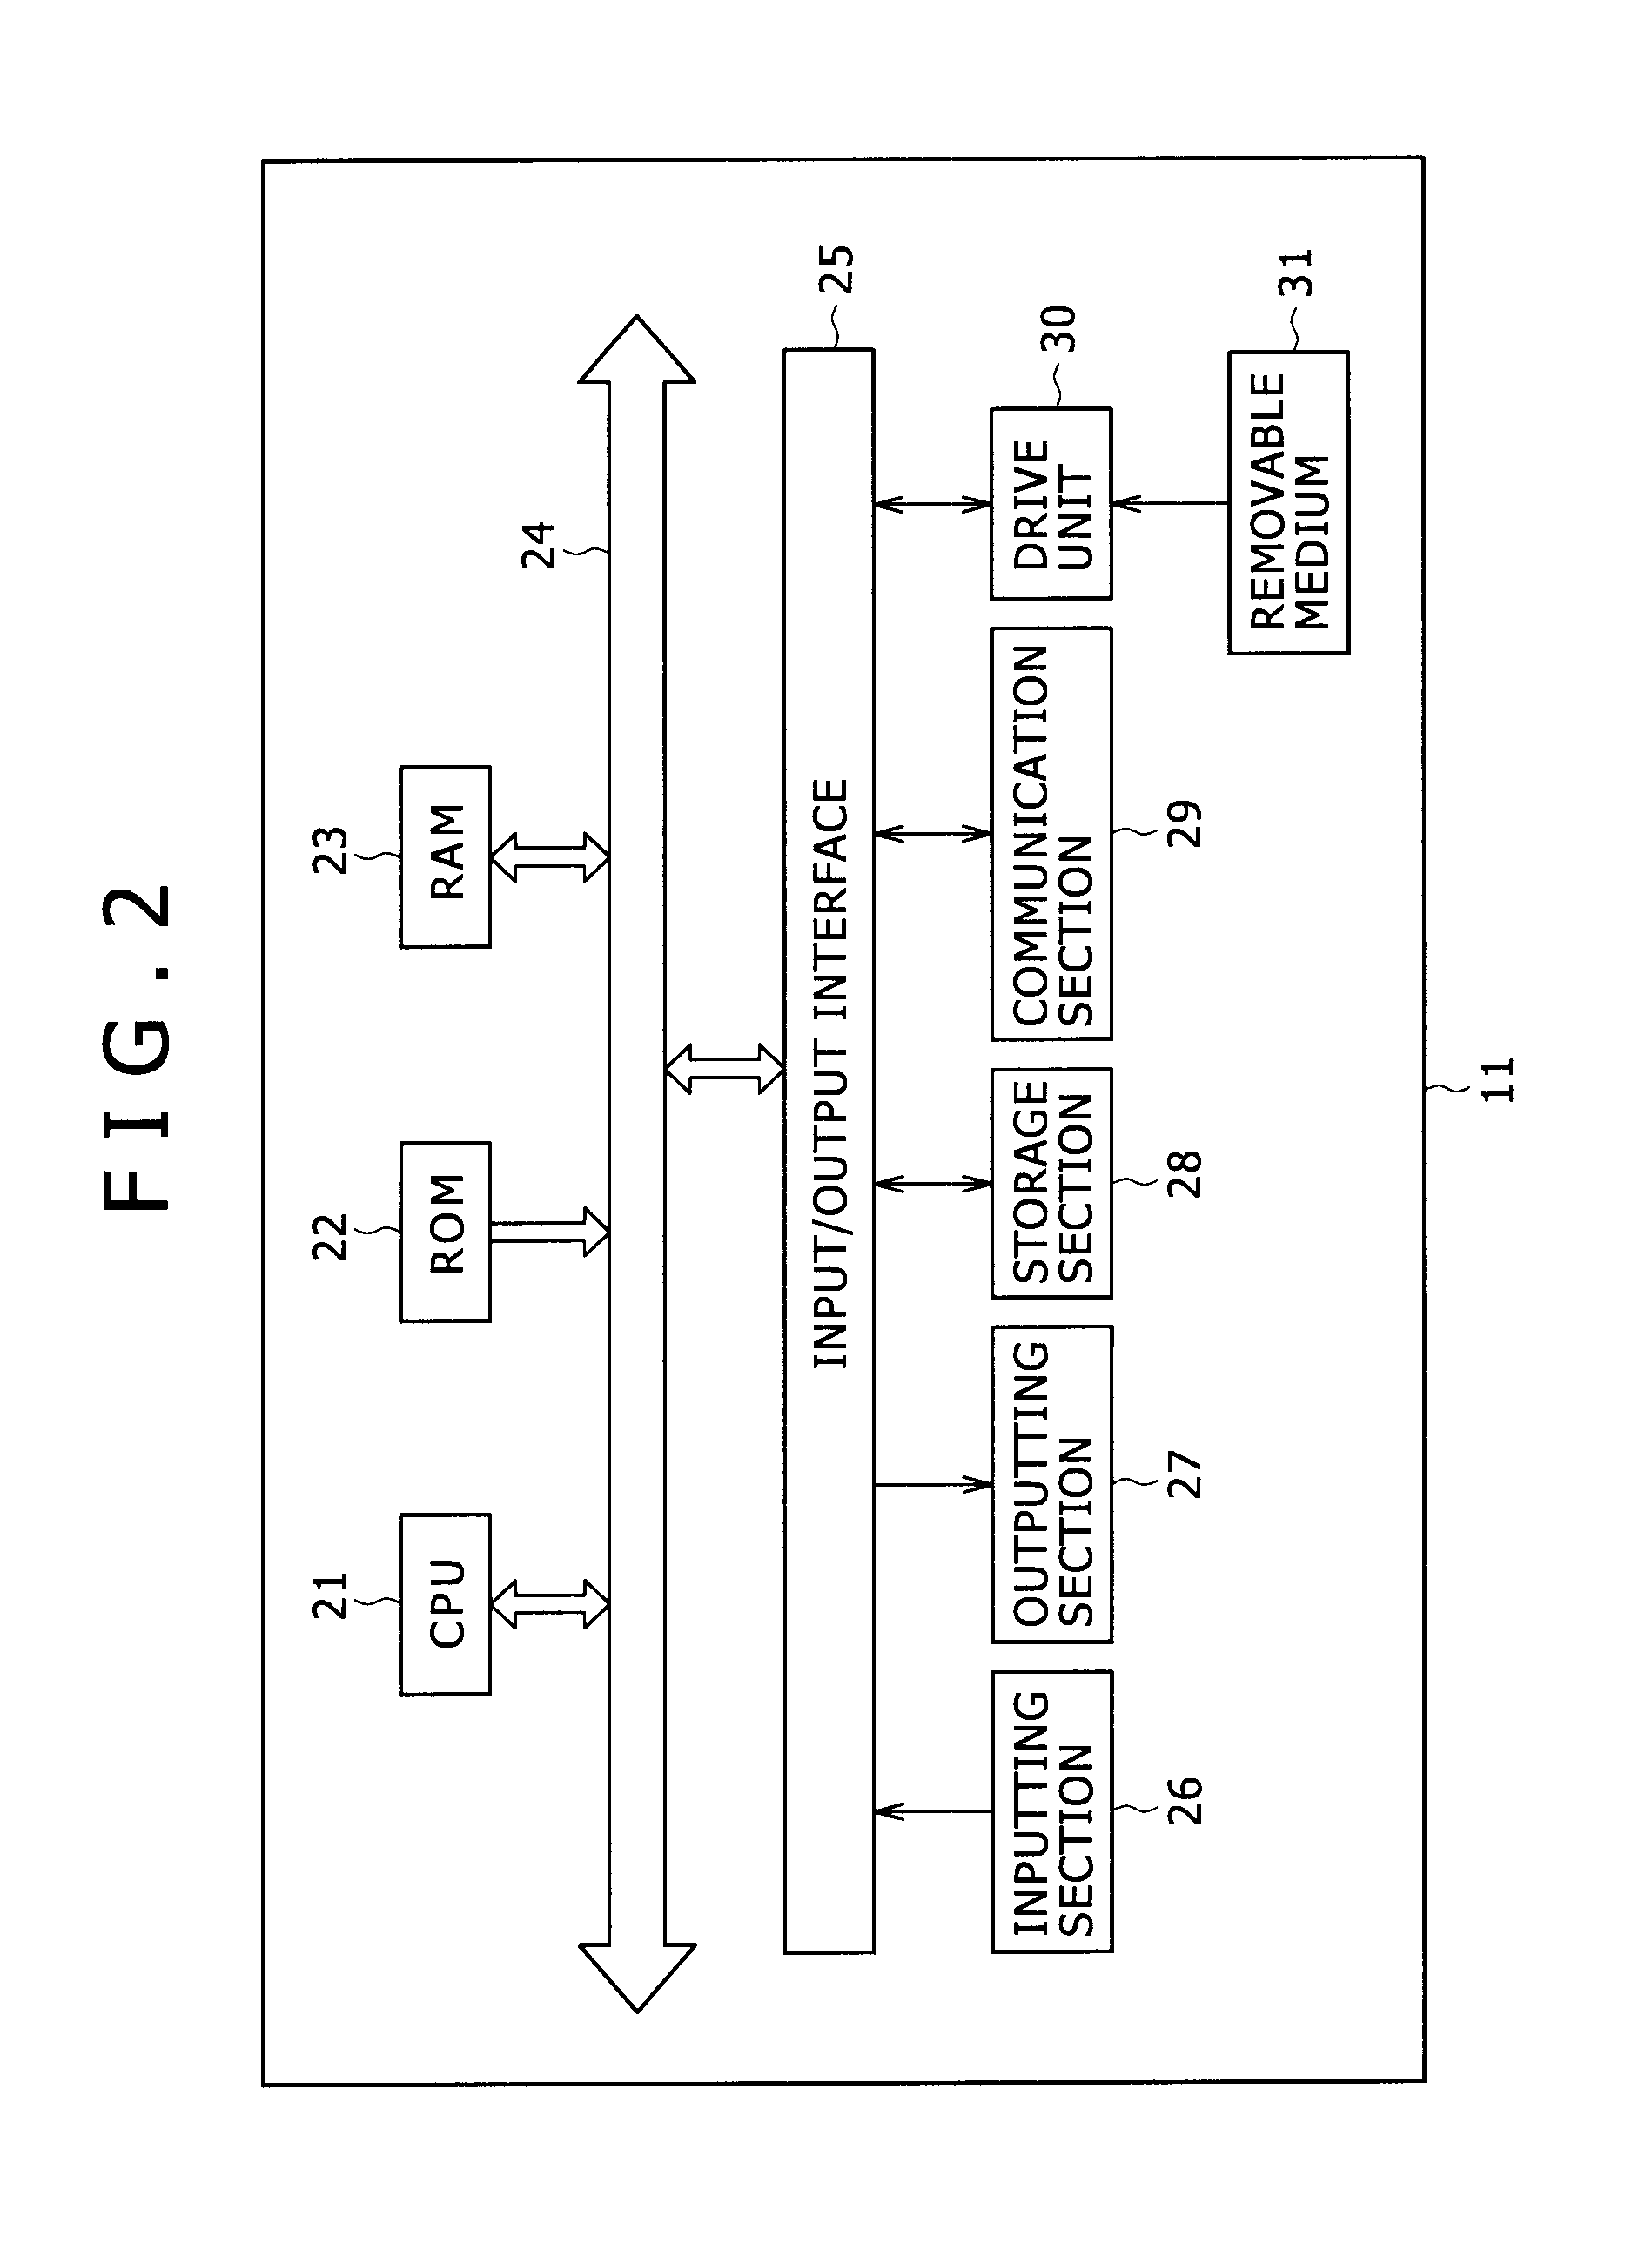 Transmission and reception apparatus, methods, and systems for filtering content